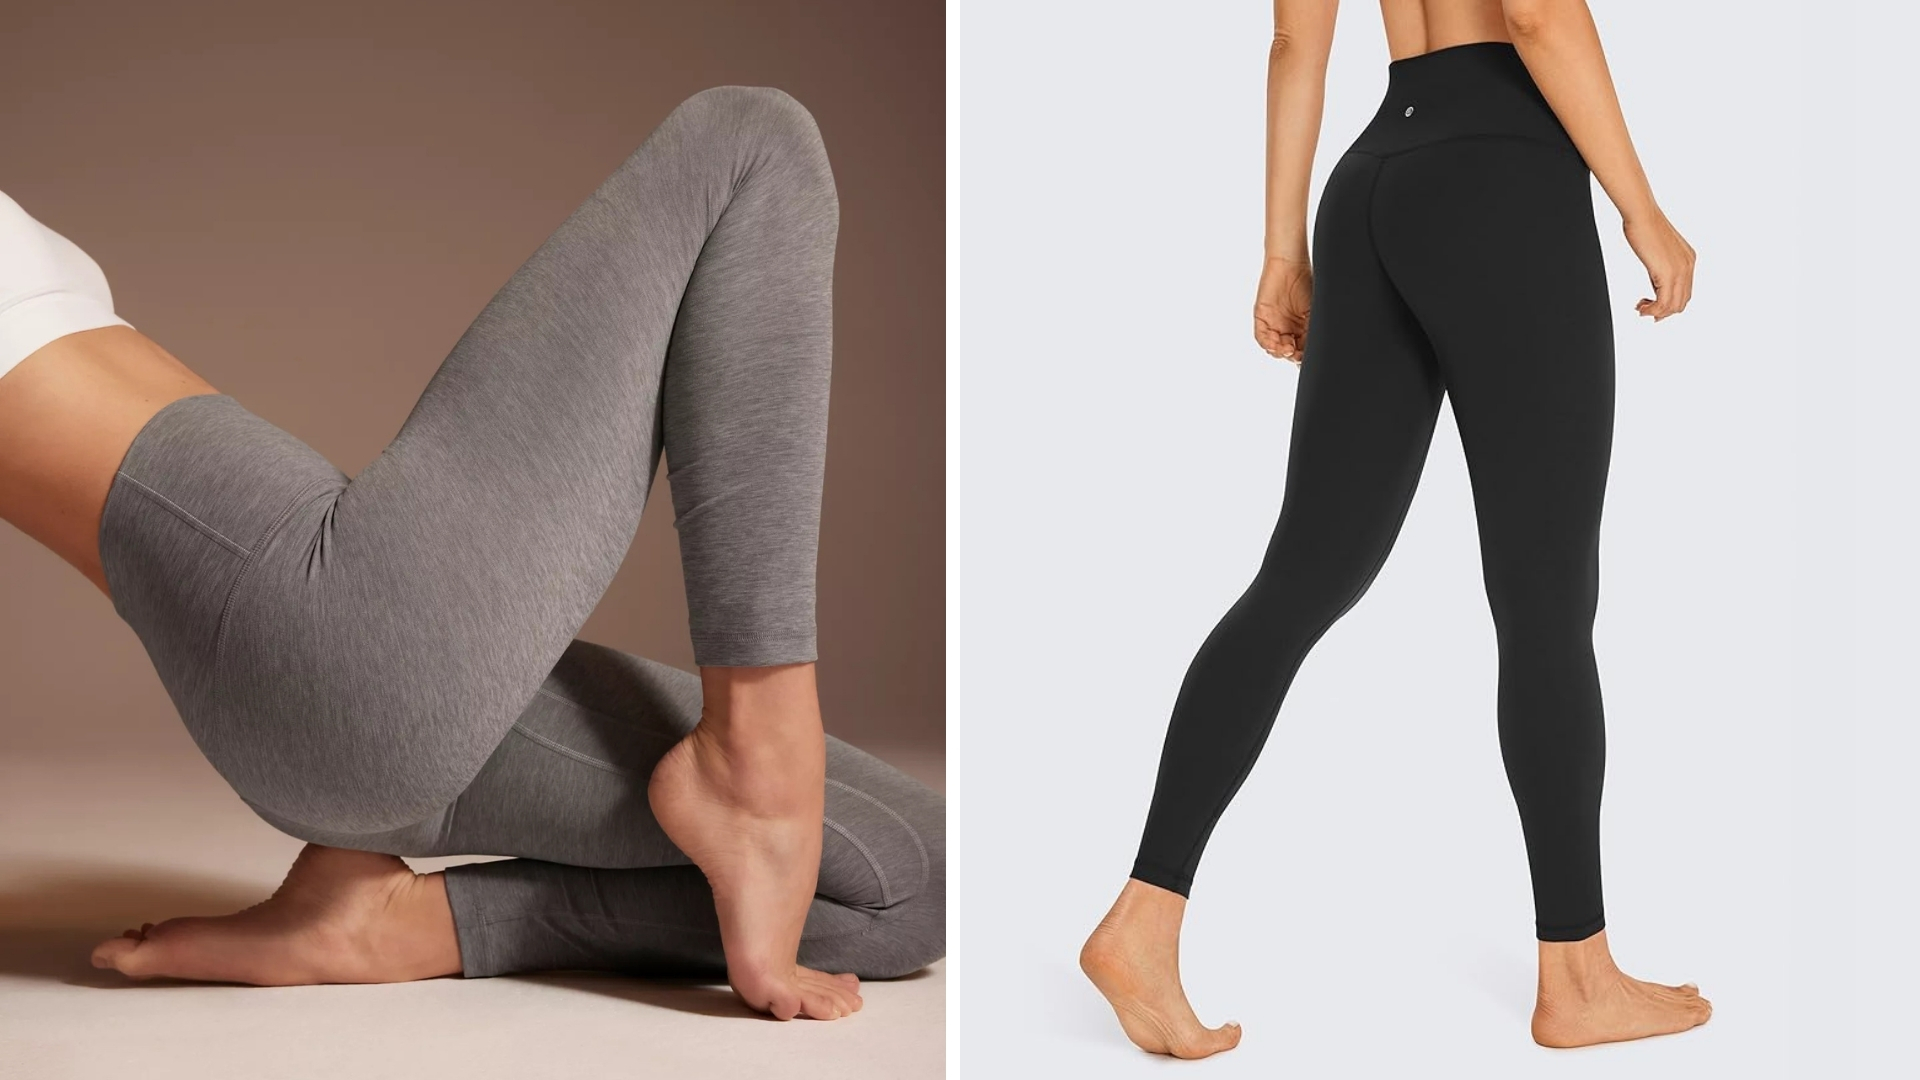 Favorite athleisure and yoga fashion brand stretches into